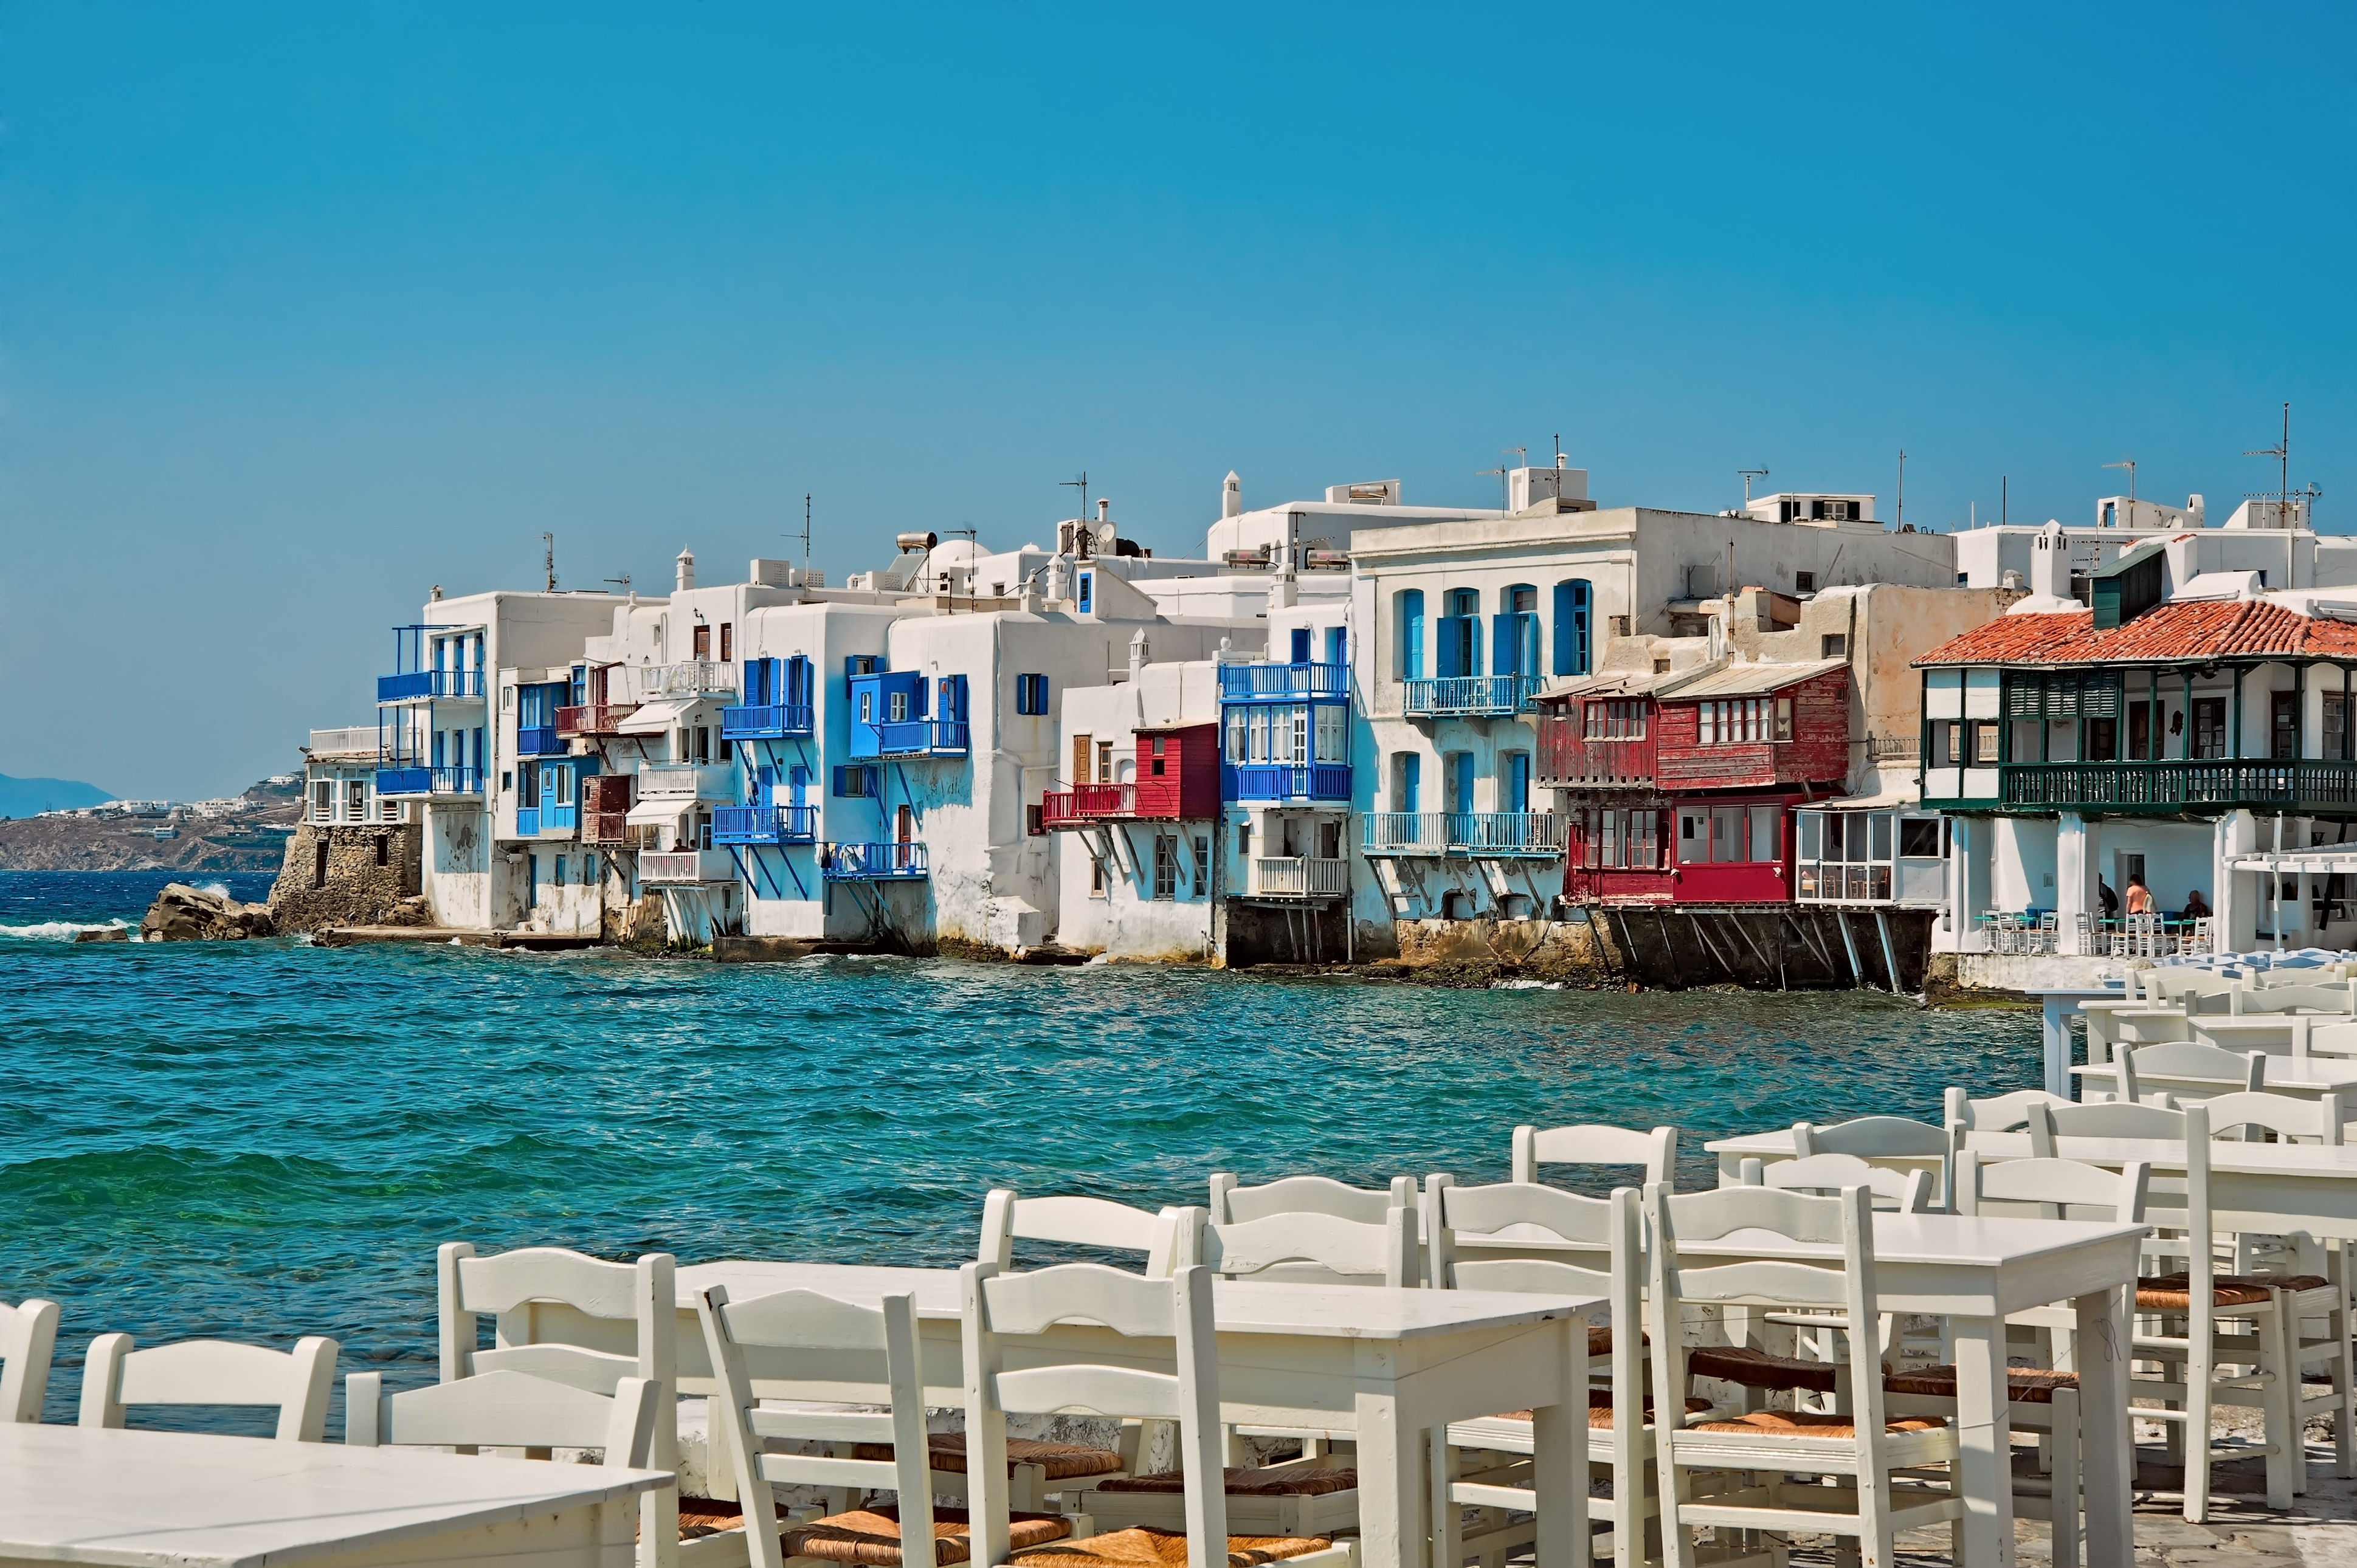 Alefkandra, Little Venice in Mykonos, Greece with cafe chairs at foreground